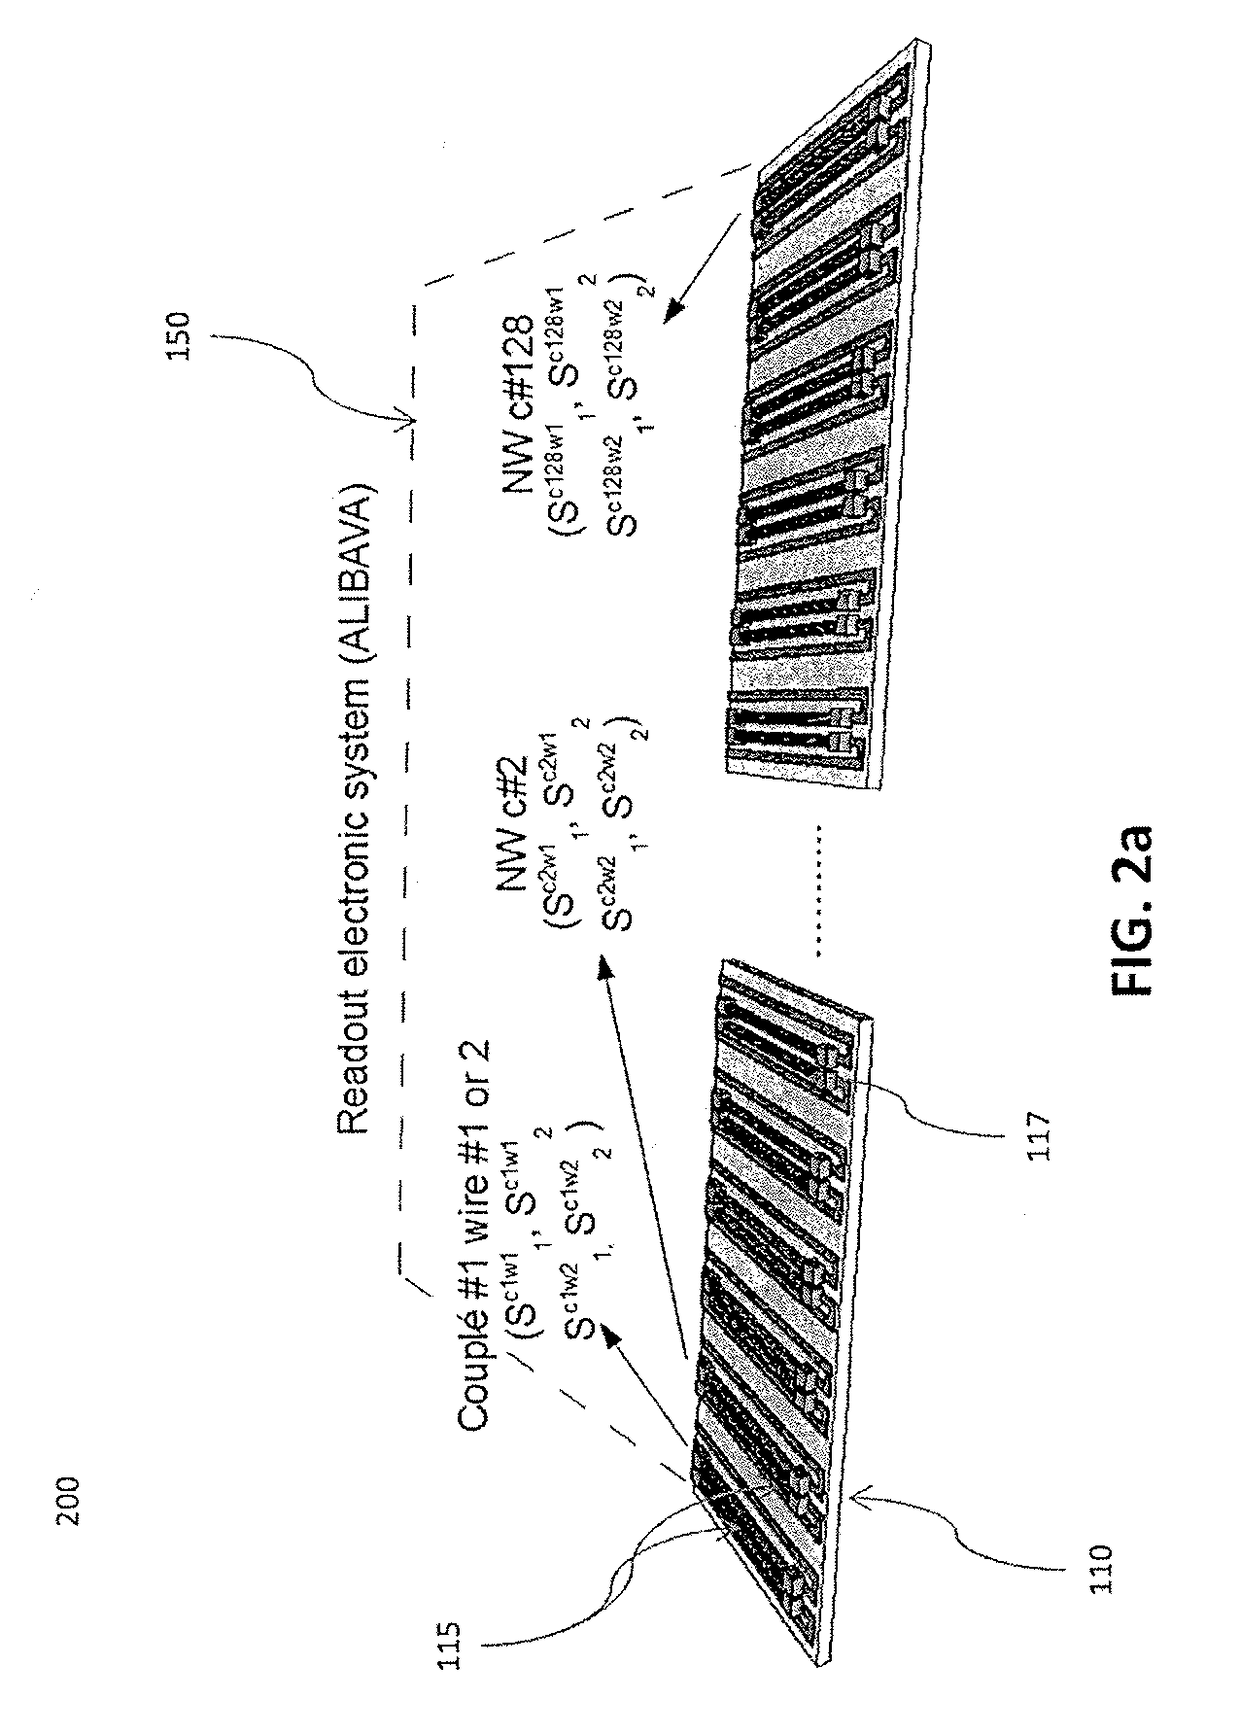 Apparatus and methods for measuring delivered ionizing radiation